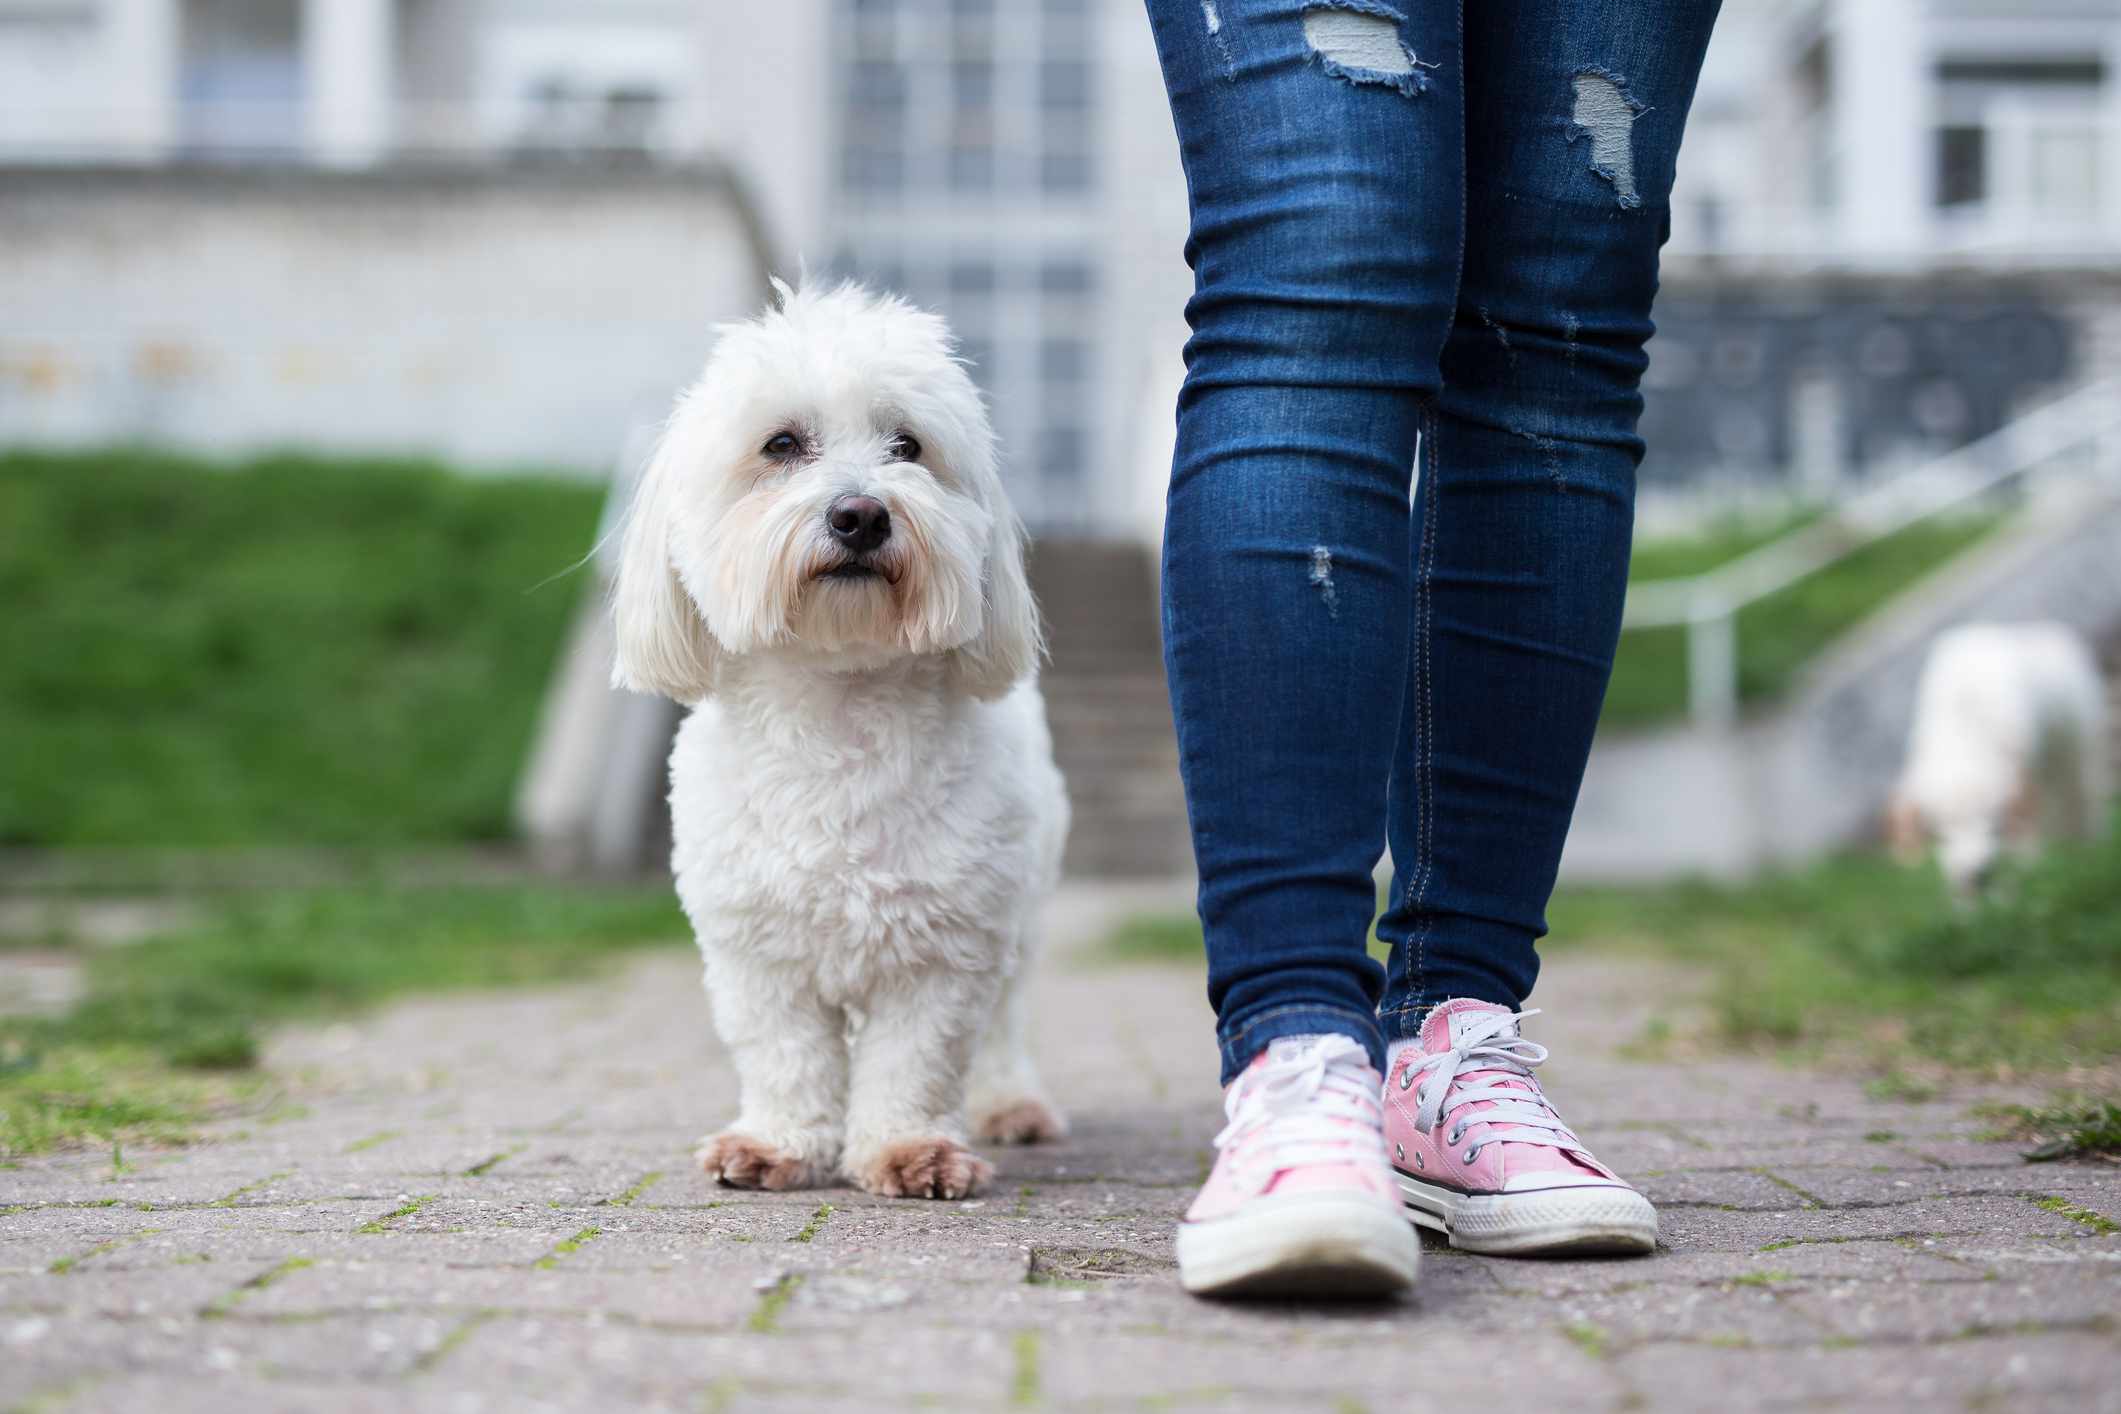 A person wearing jeans and converse walking next to a white, fluffy, small dog.